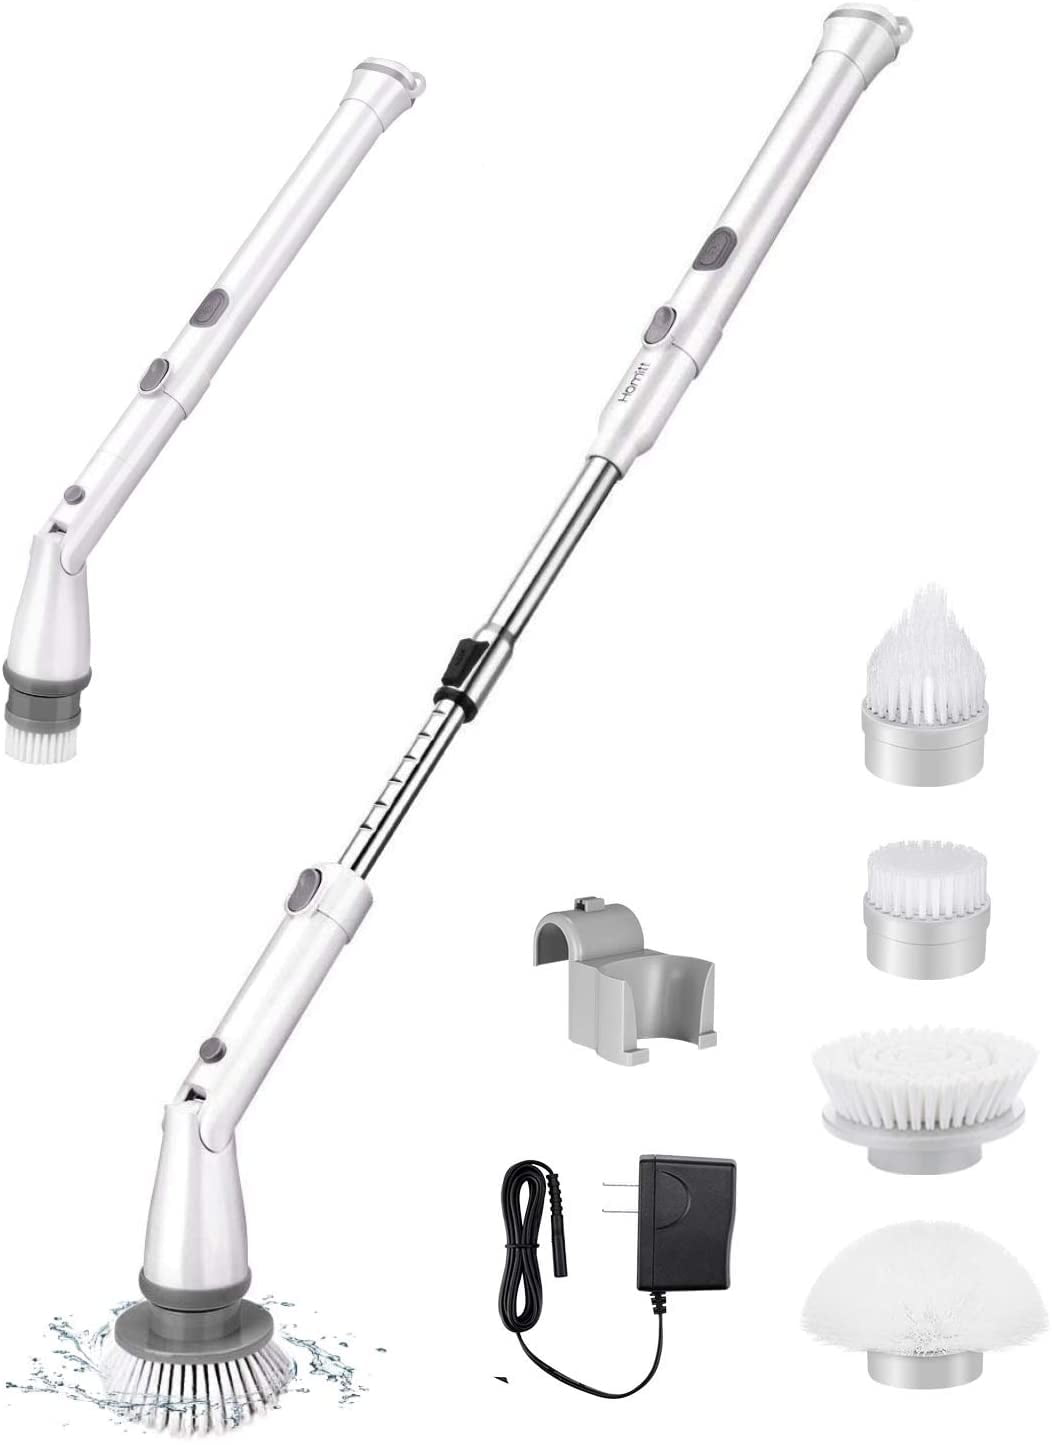 350 RPM Cordless Scrubbing Cleaning Brush with 3 Replaceable Bathroom Cleaner Heads for Pool Bathtub Sink White HM204 Corner Tub Grout Homitt Electric Spin Scrubber Baseboard Floor 